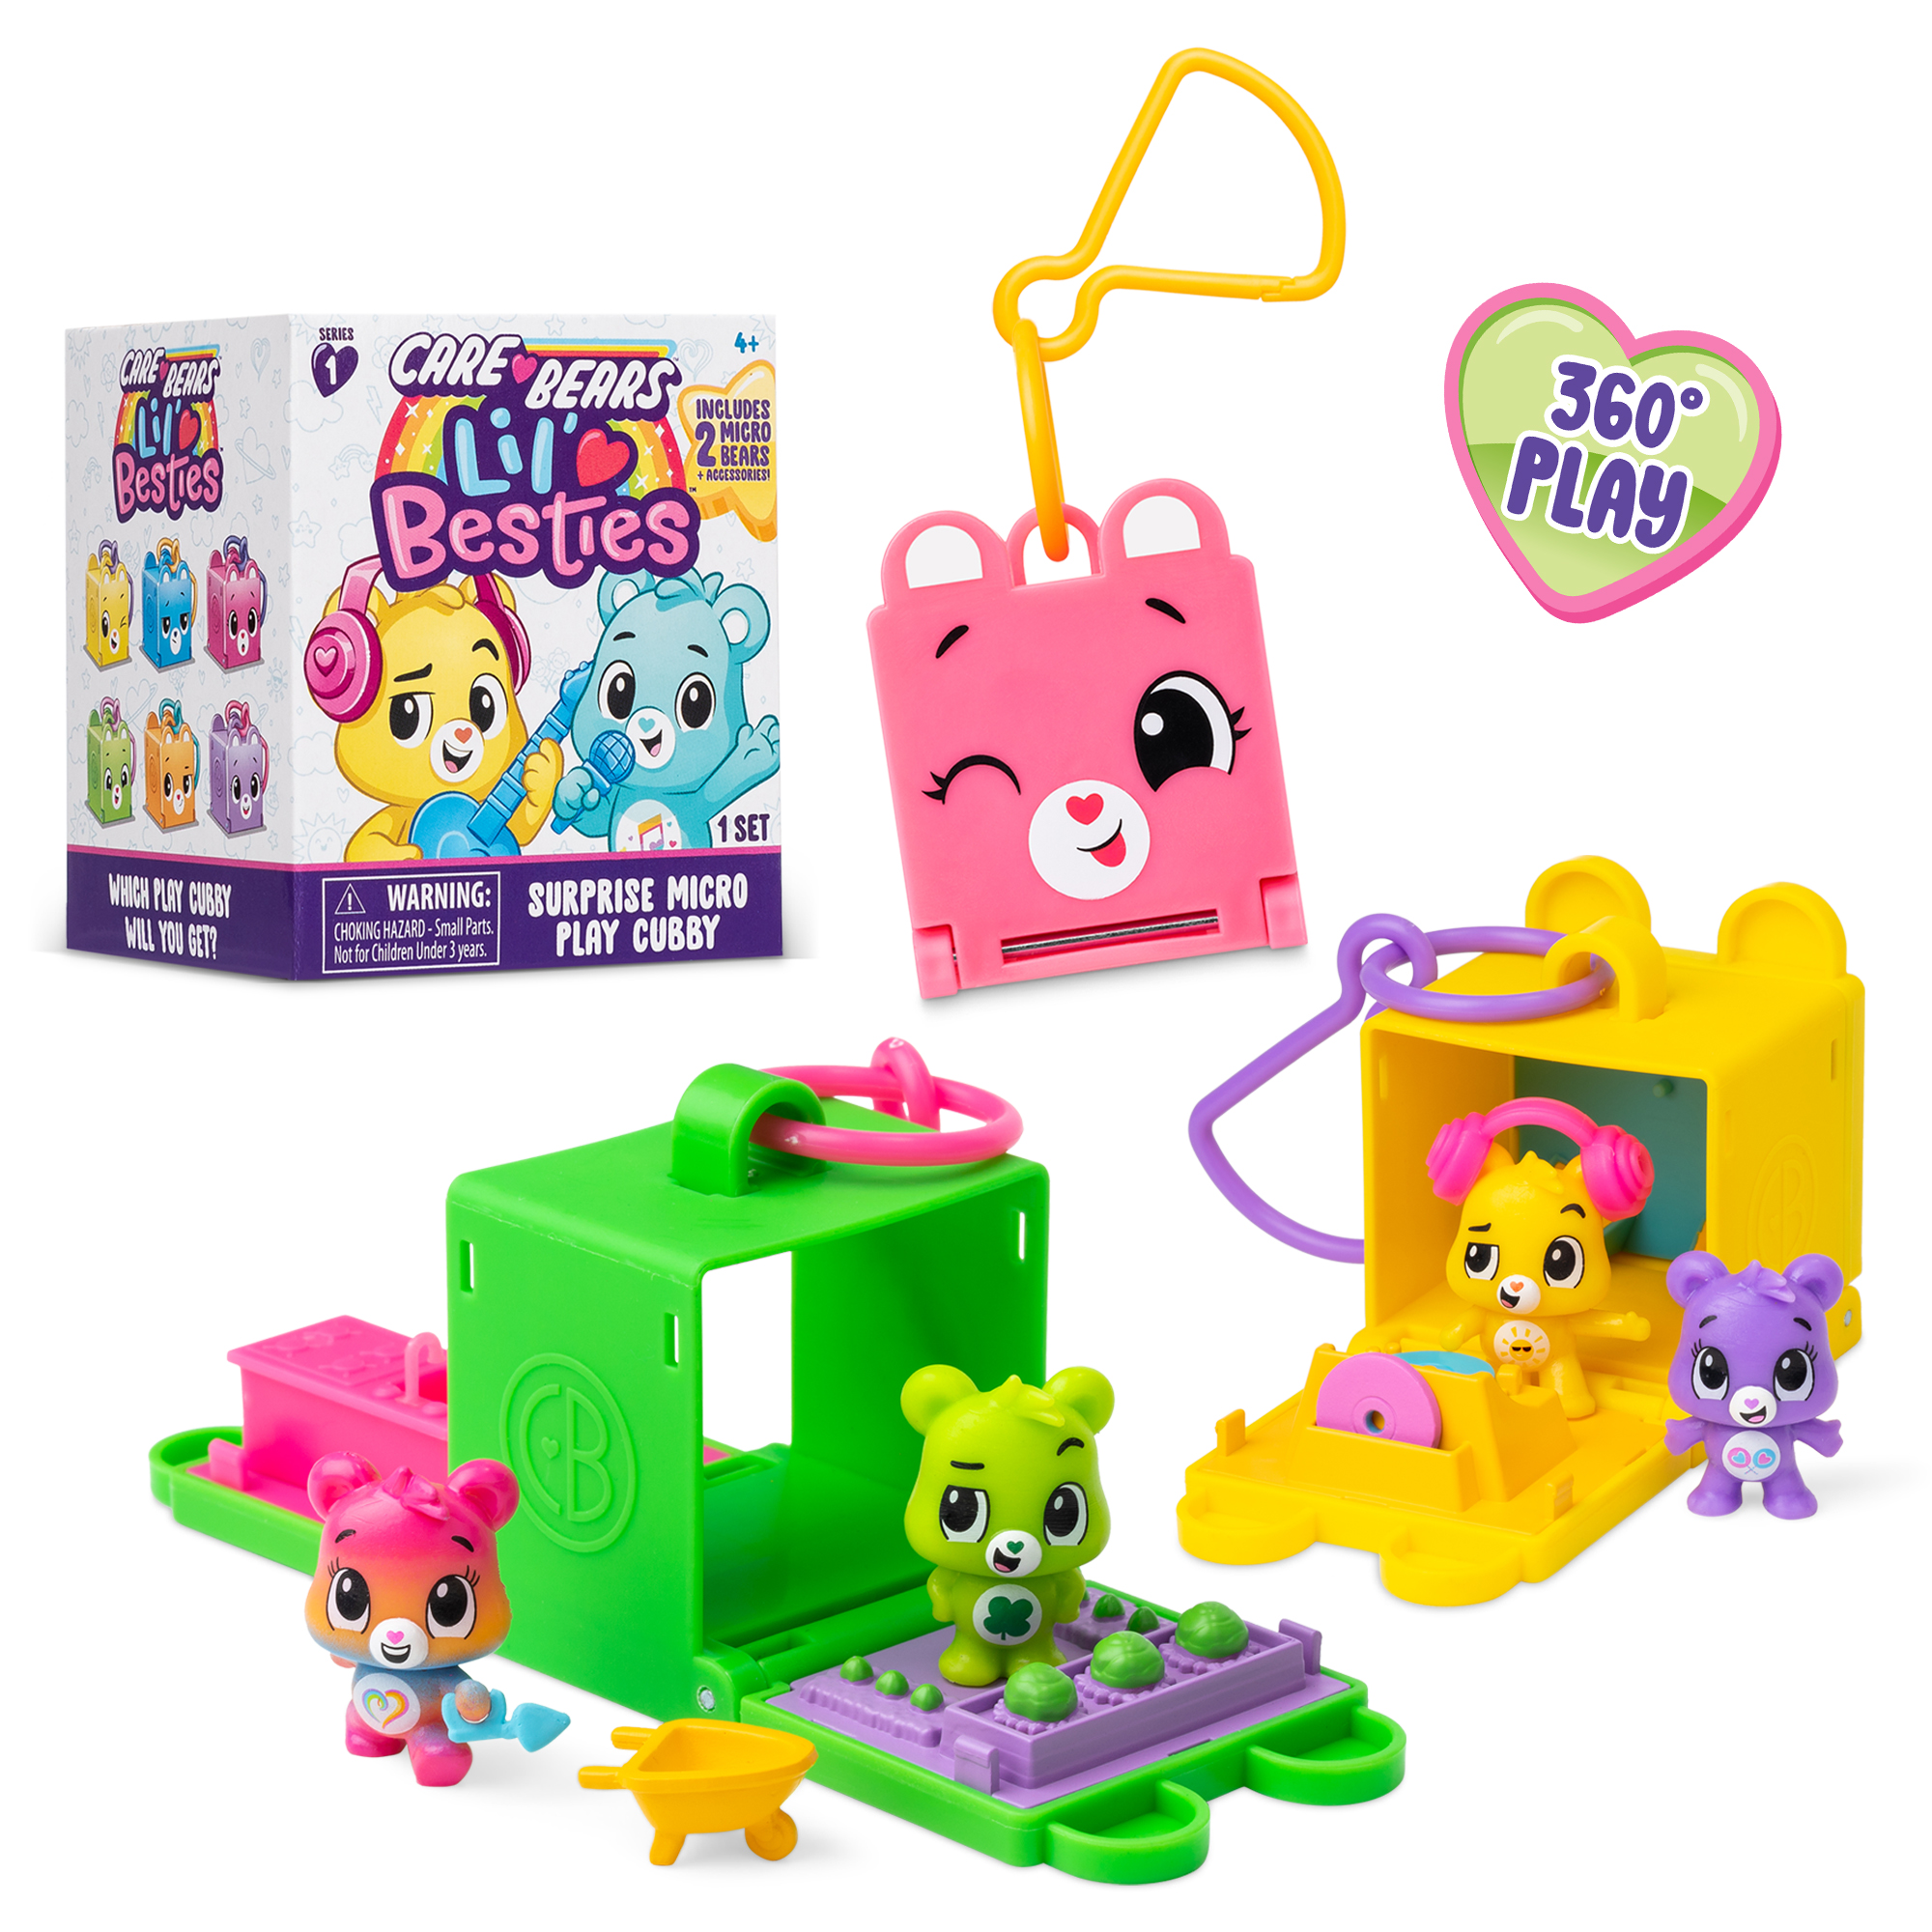 Care Bears Lil Besties Cubby variant with packaging